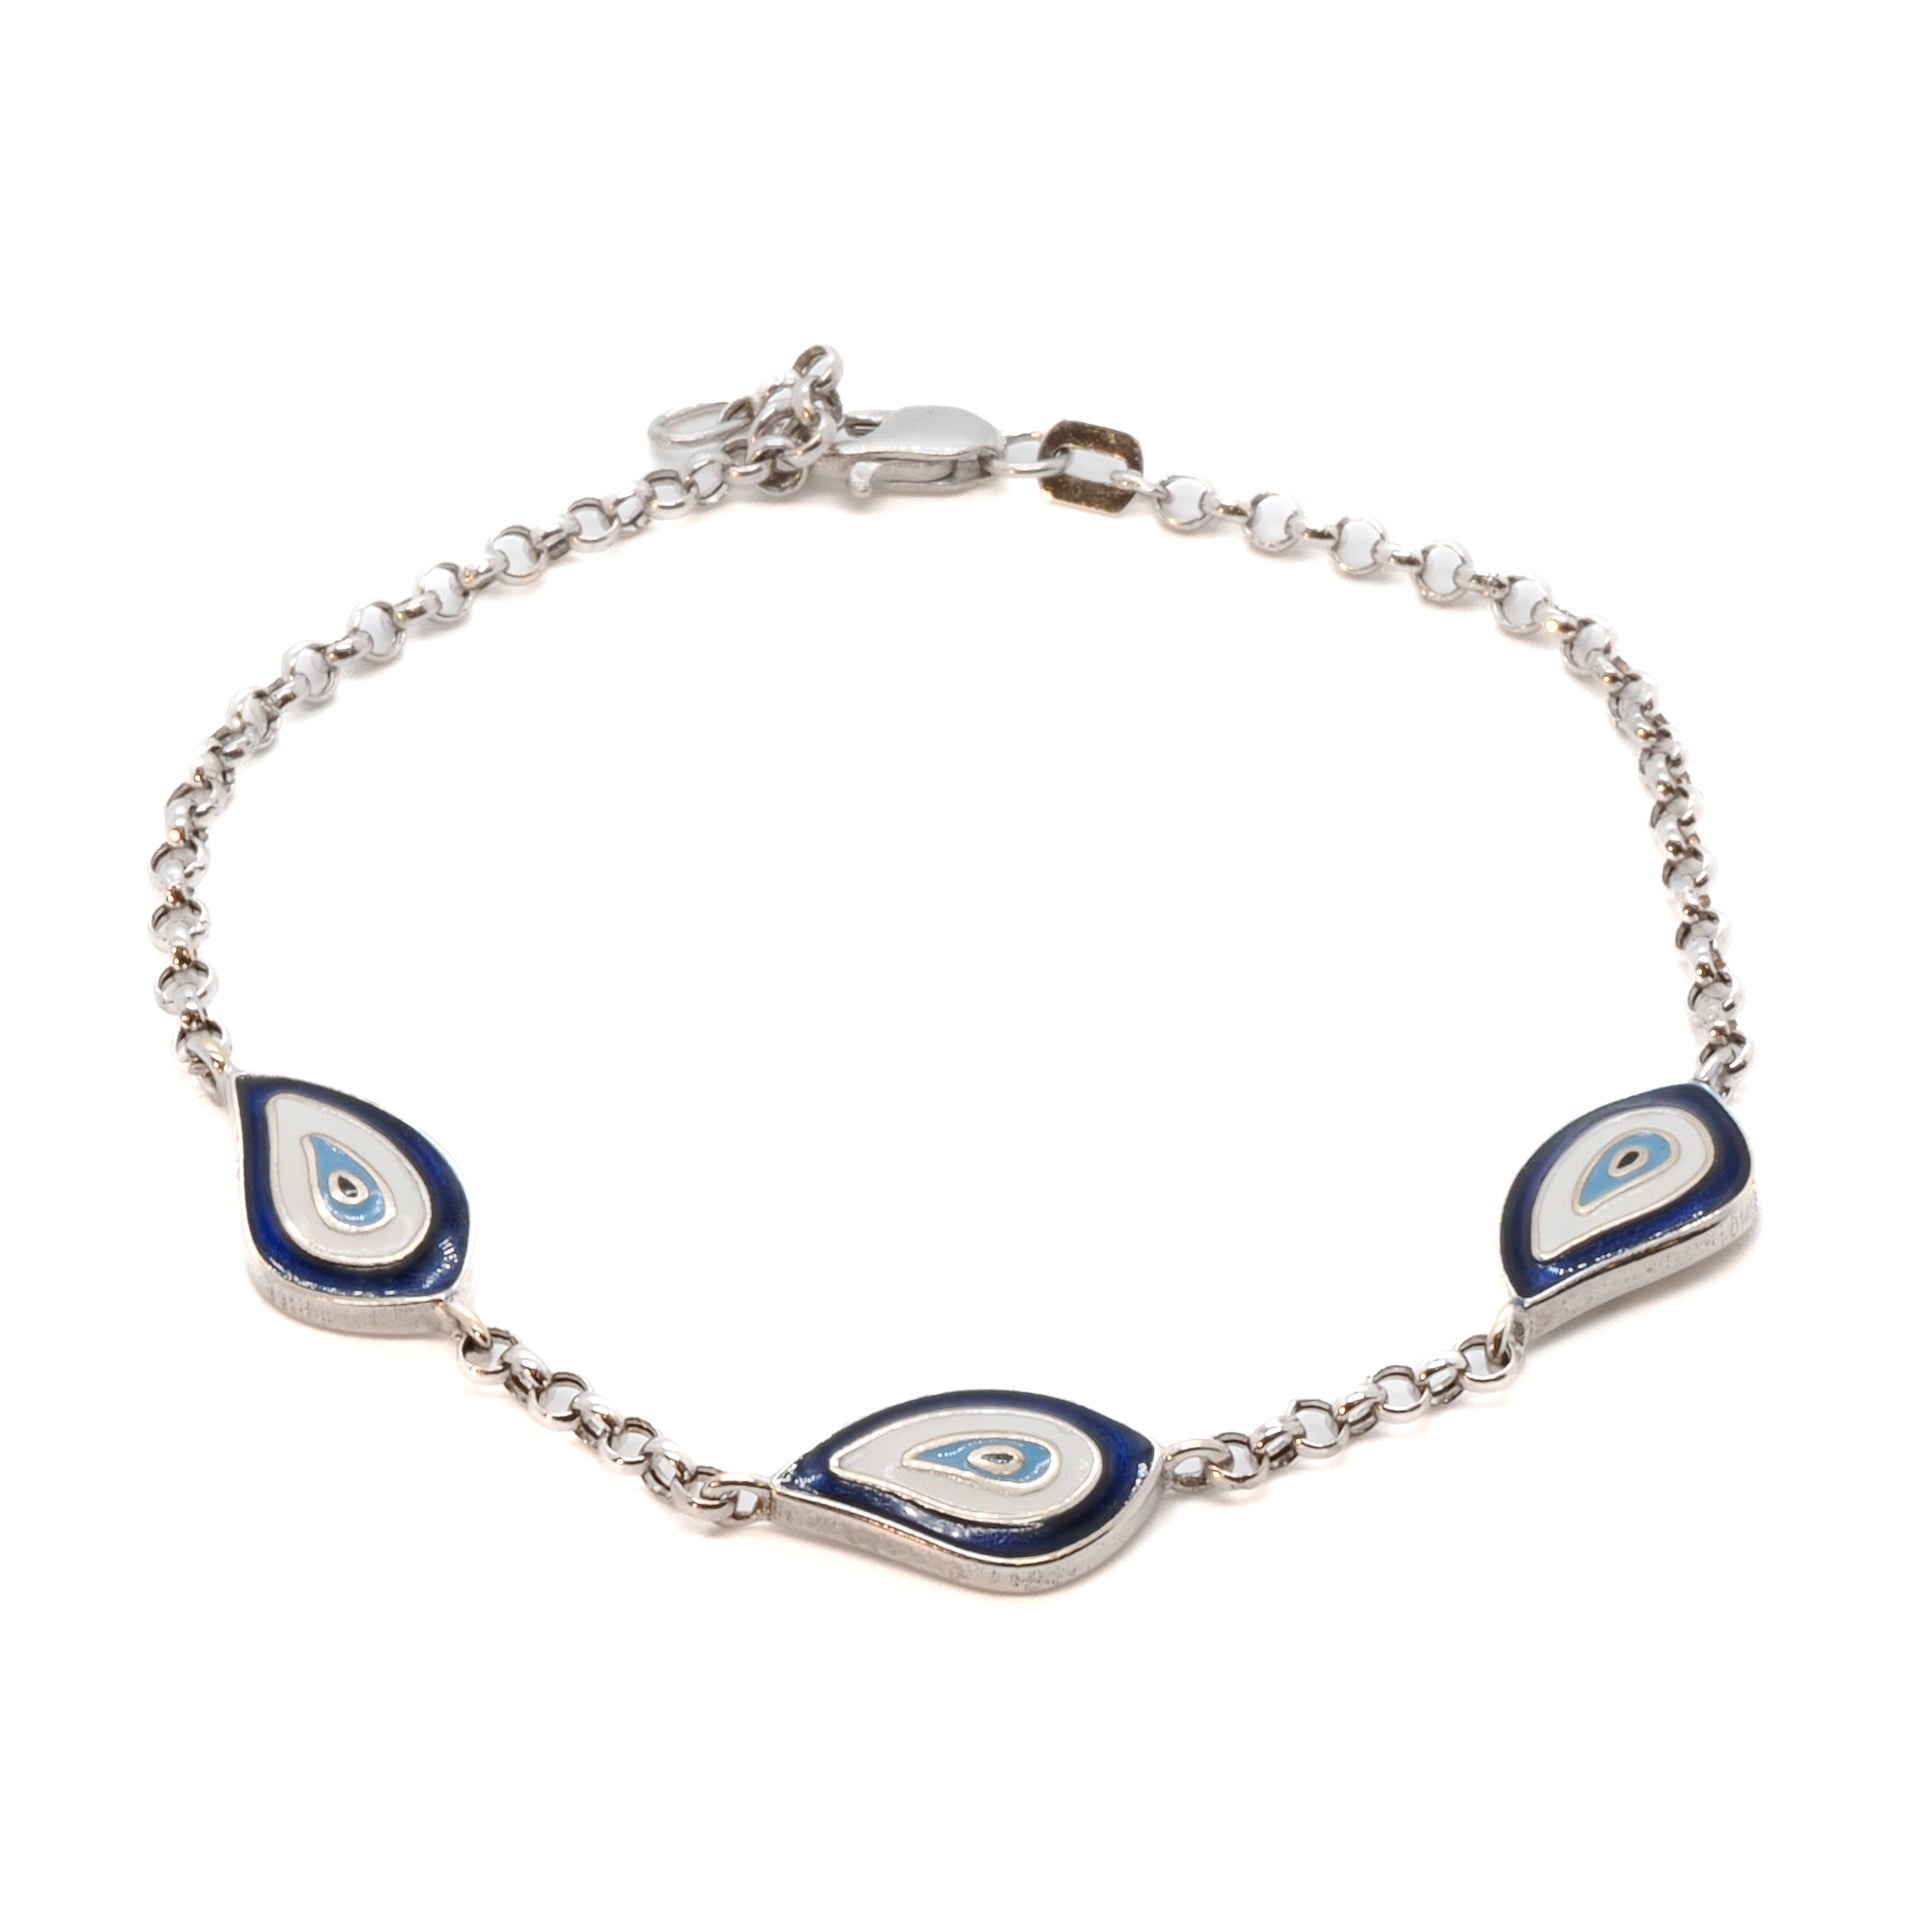 Teardrop Evil Eye Bracelet - Handcrafted from 14 Carat white gold with blue and white enamel.